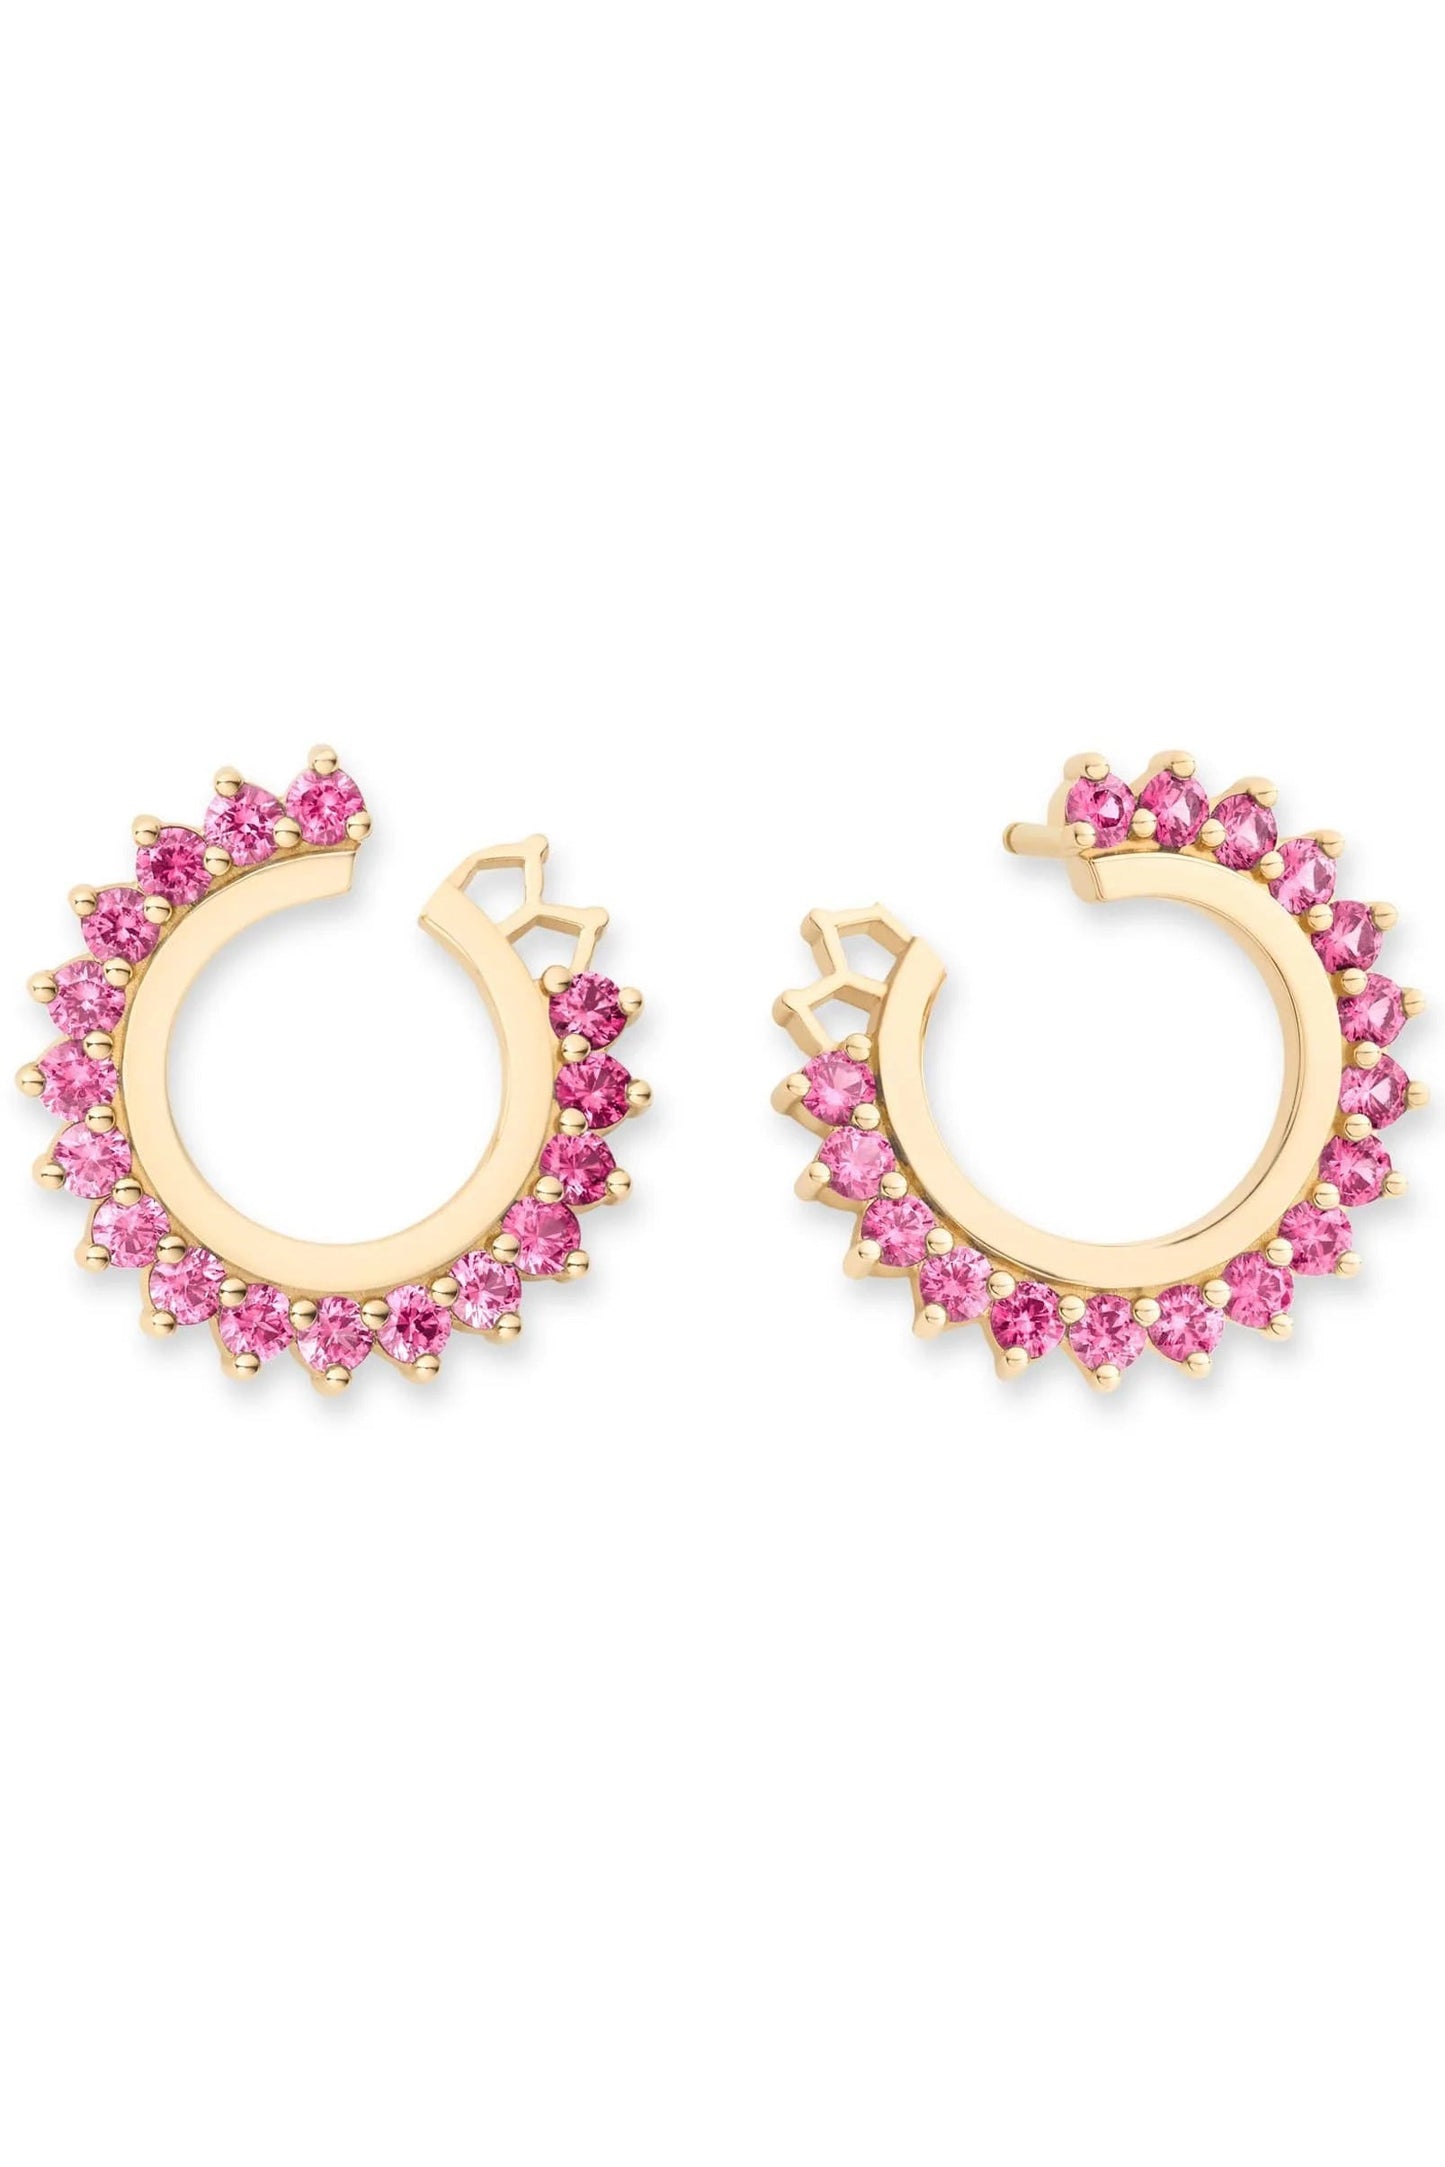 NOUVEL HERITAGE-Vendome Pink Sapphire Earrings-YELLOW GOLD